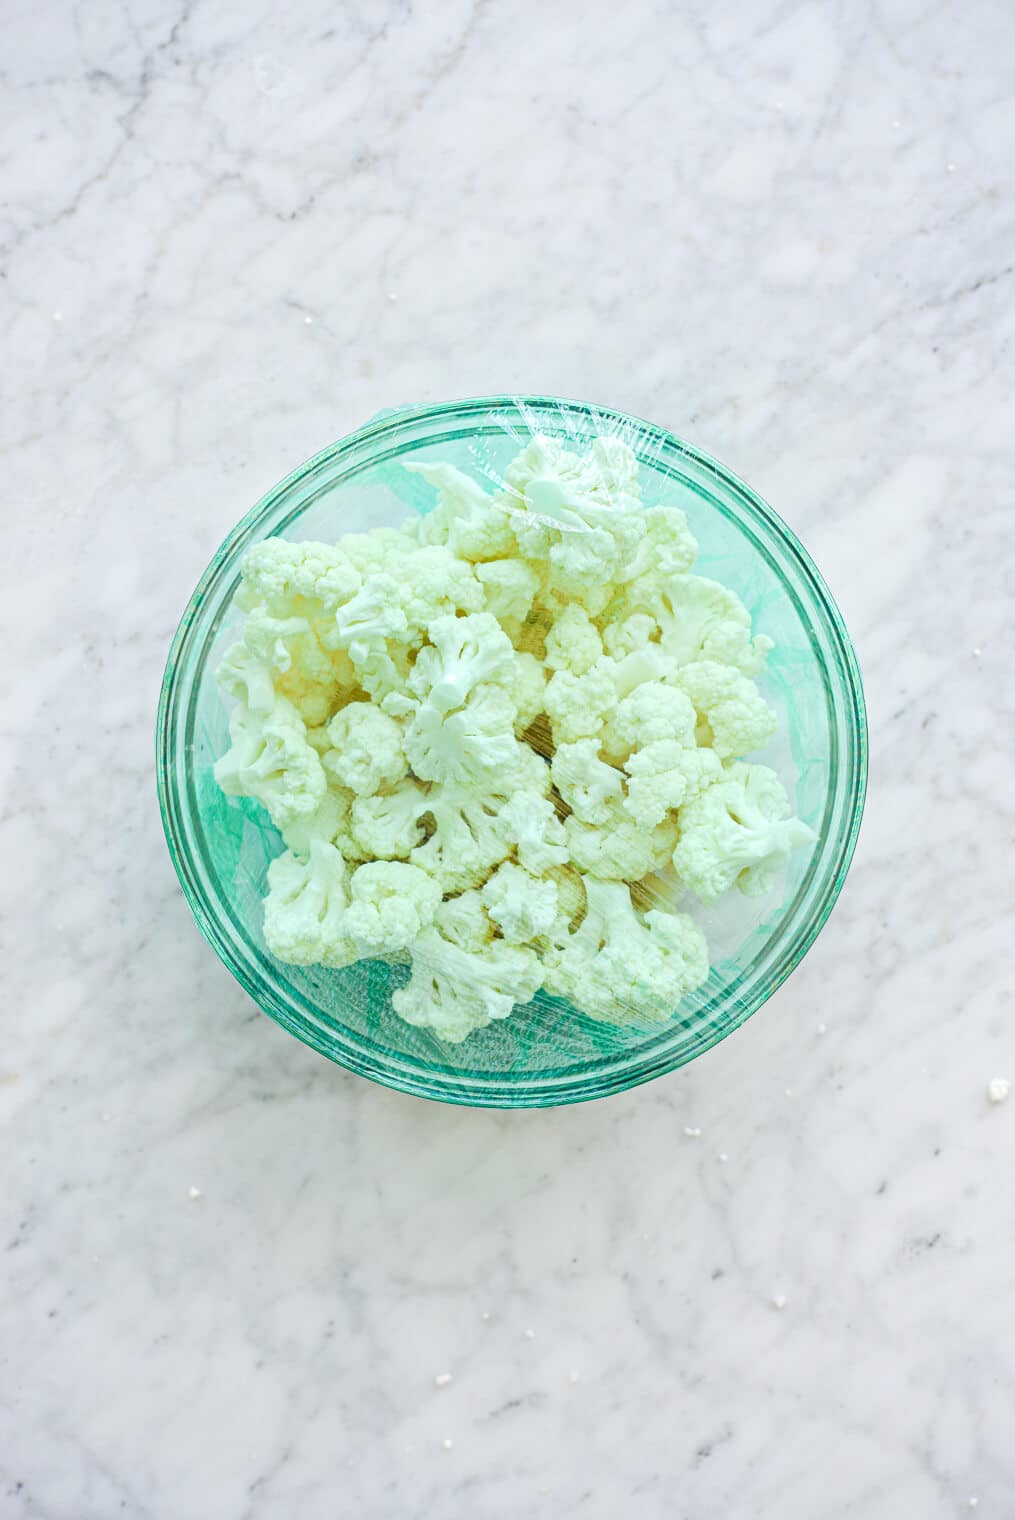 Cauliflower florets in glass bowl covered with light green plastic wrap sitting on grey and white marble countertop